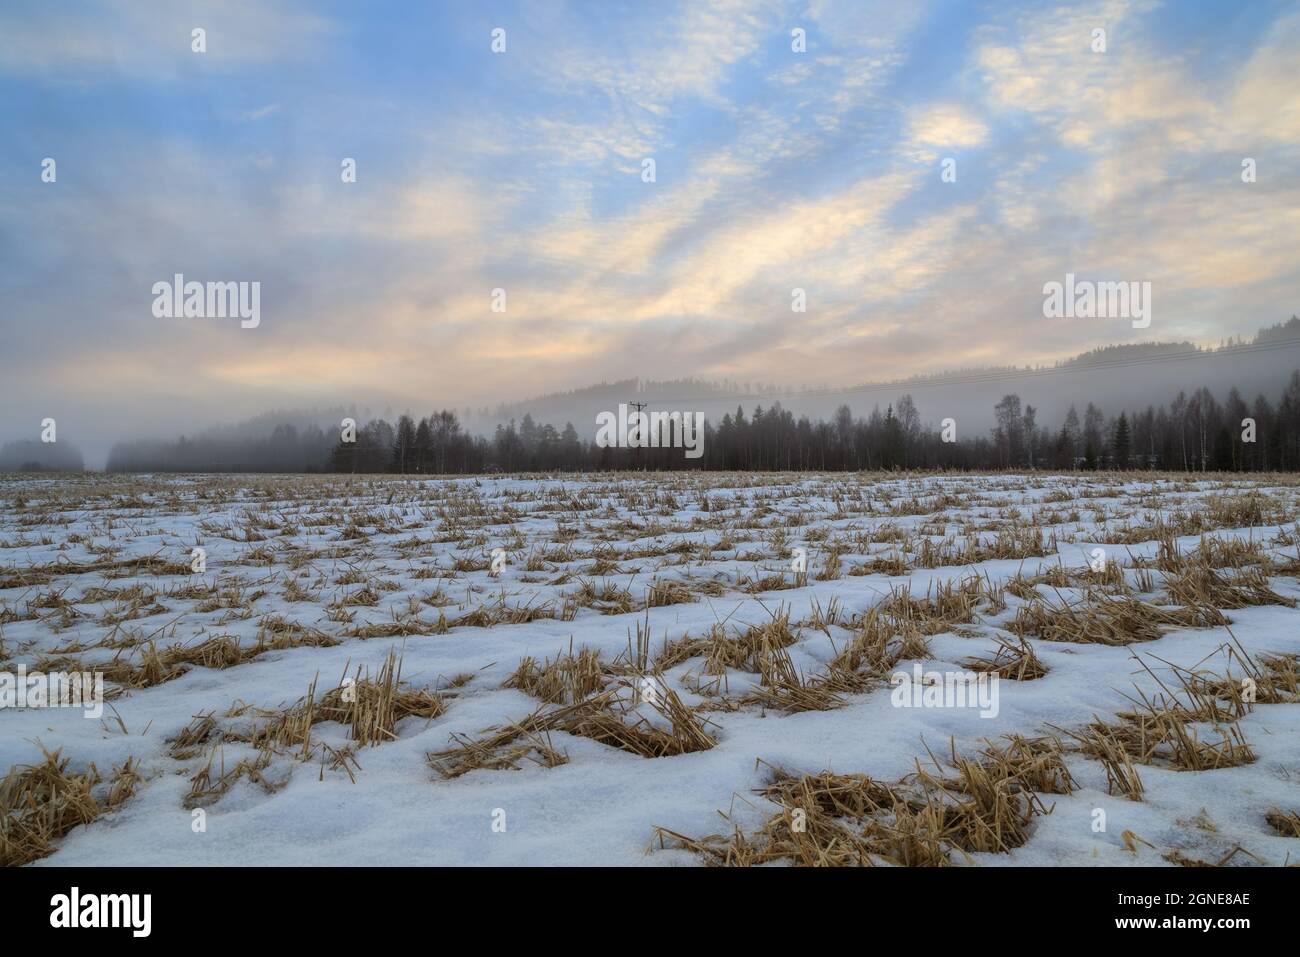 fields with snow in a winter, mountain landscape during sunrise Stock Photo